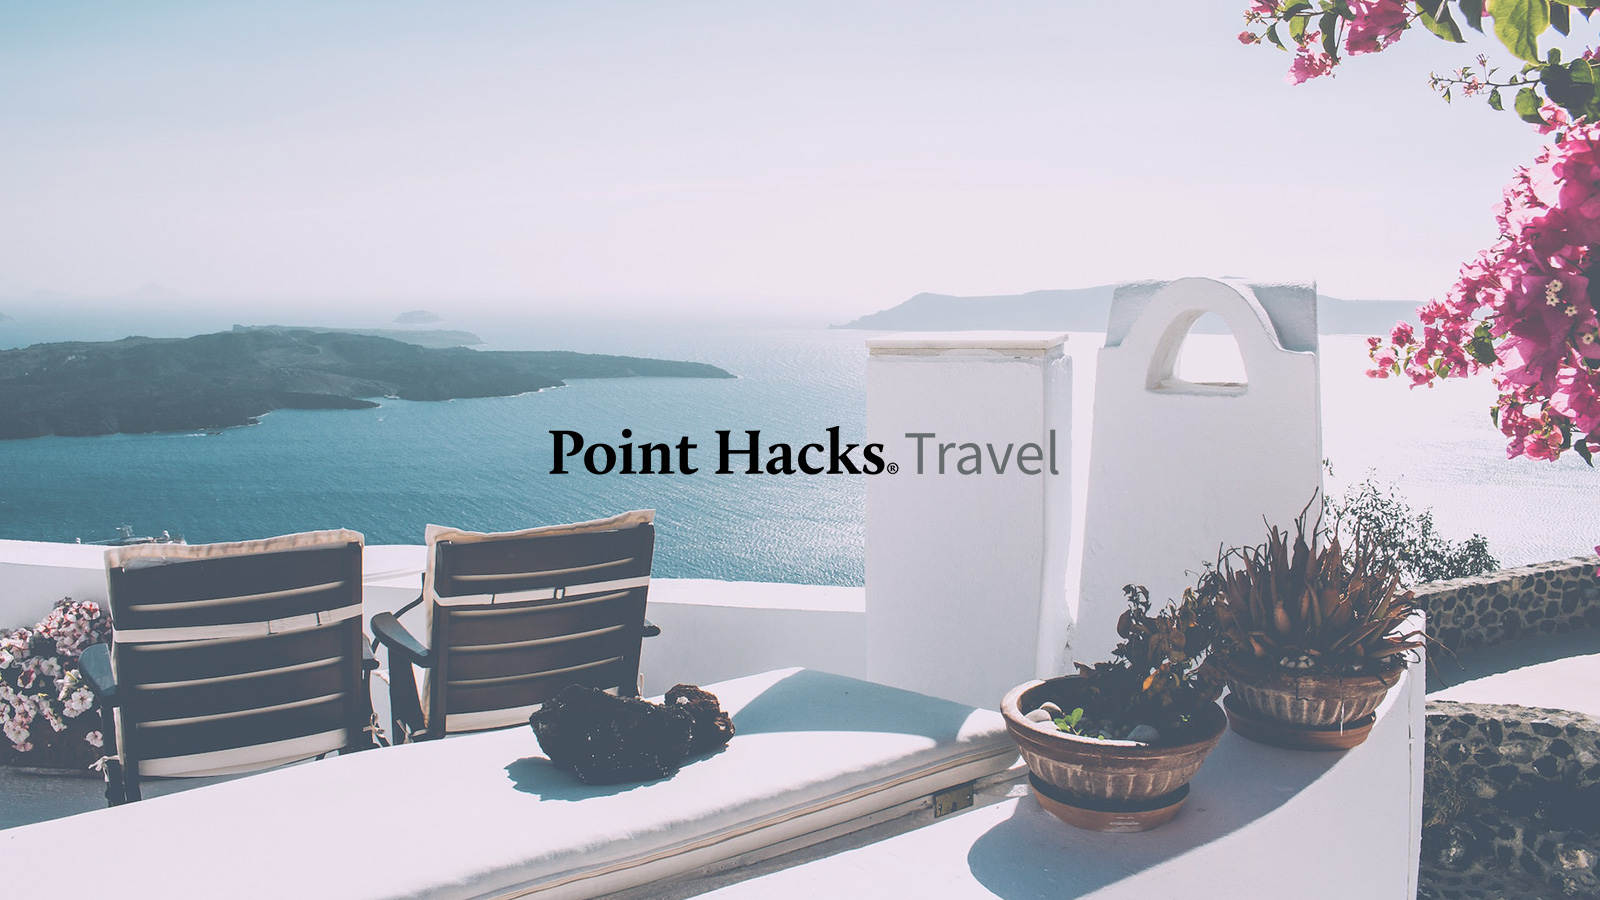 Point Hacks Travel featured